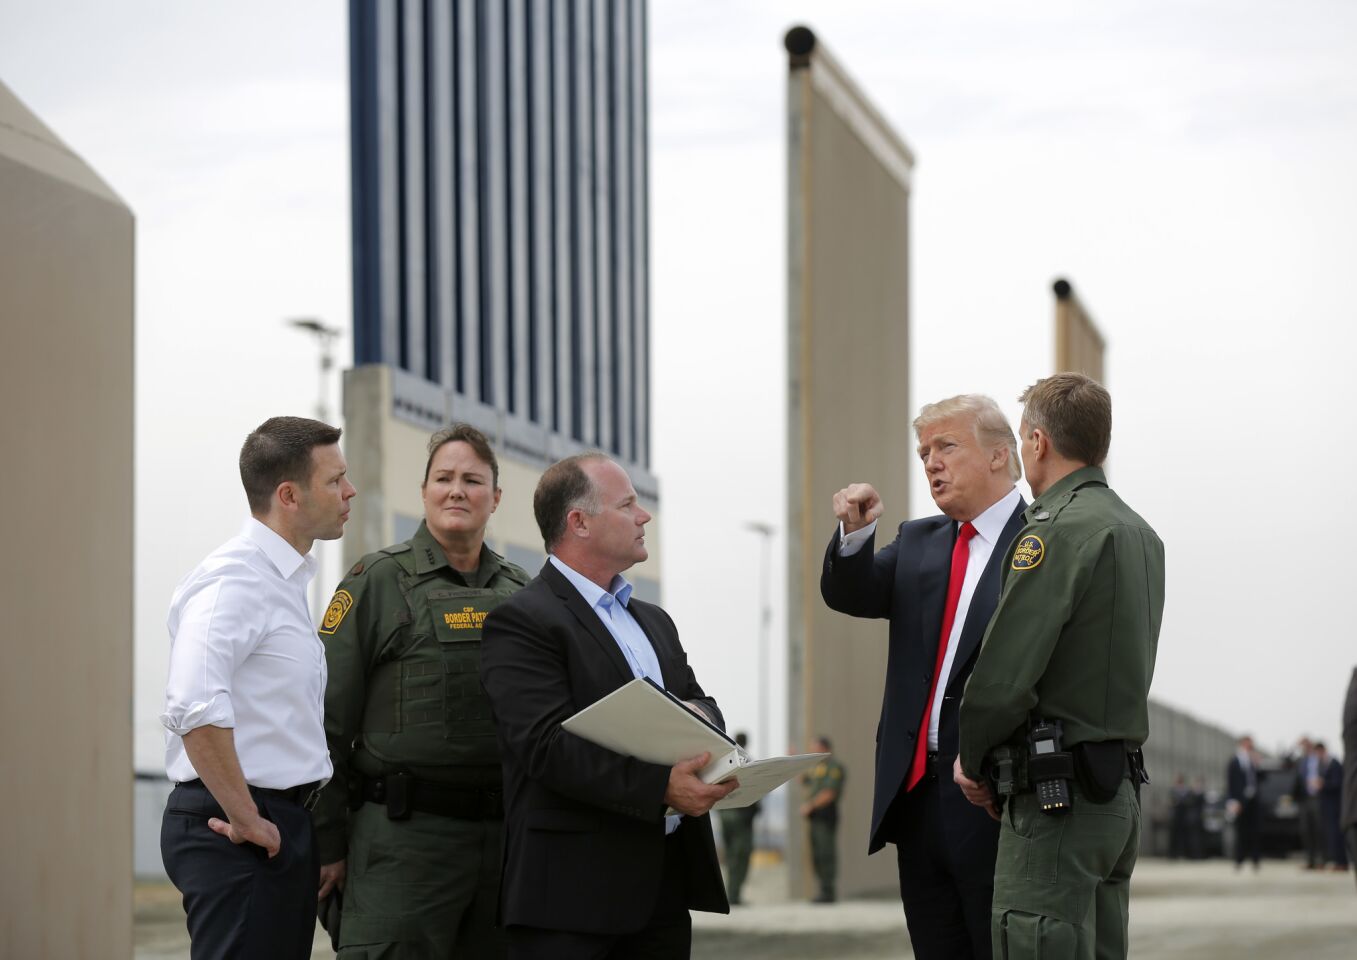 President Trump and officials discuss proposed border wall prototypes near San Diego on March 13.